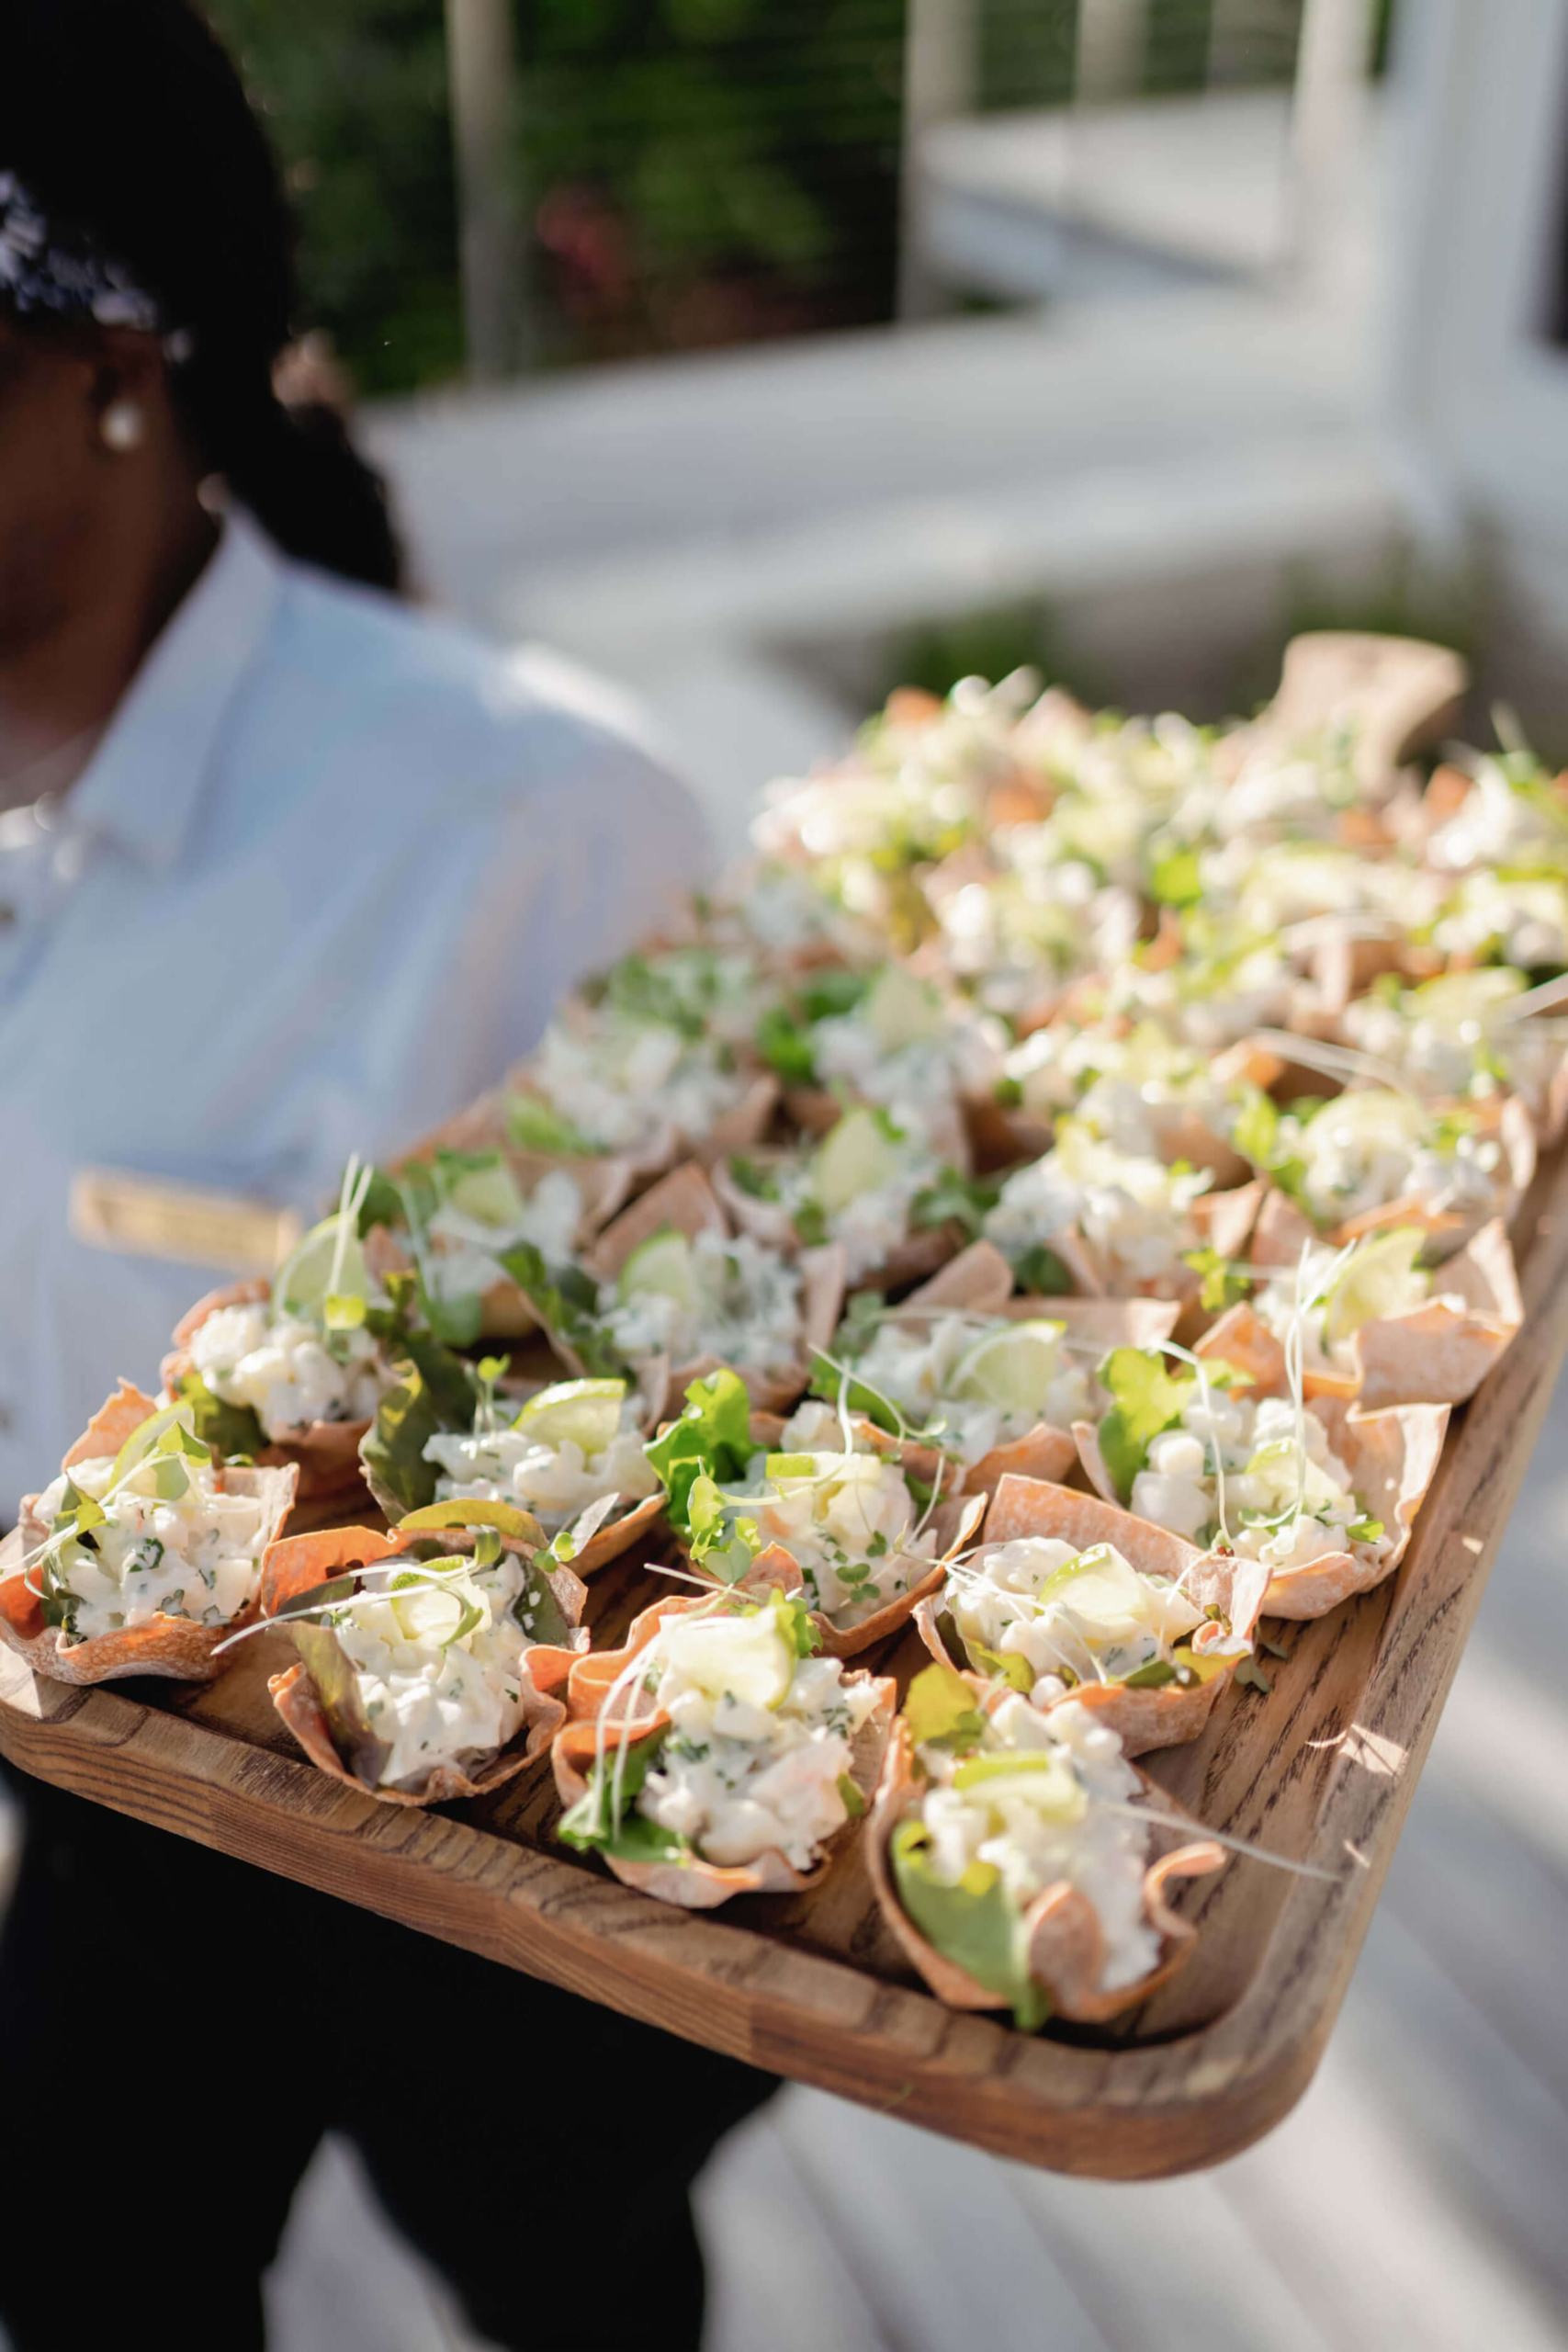 Exquisite appetizers served by a staff member at The Abaco Club, showcasing the club's high-end culinary experience in coastal living